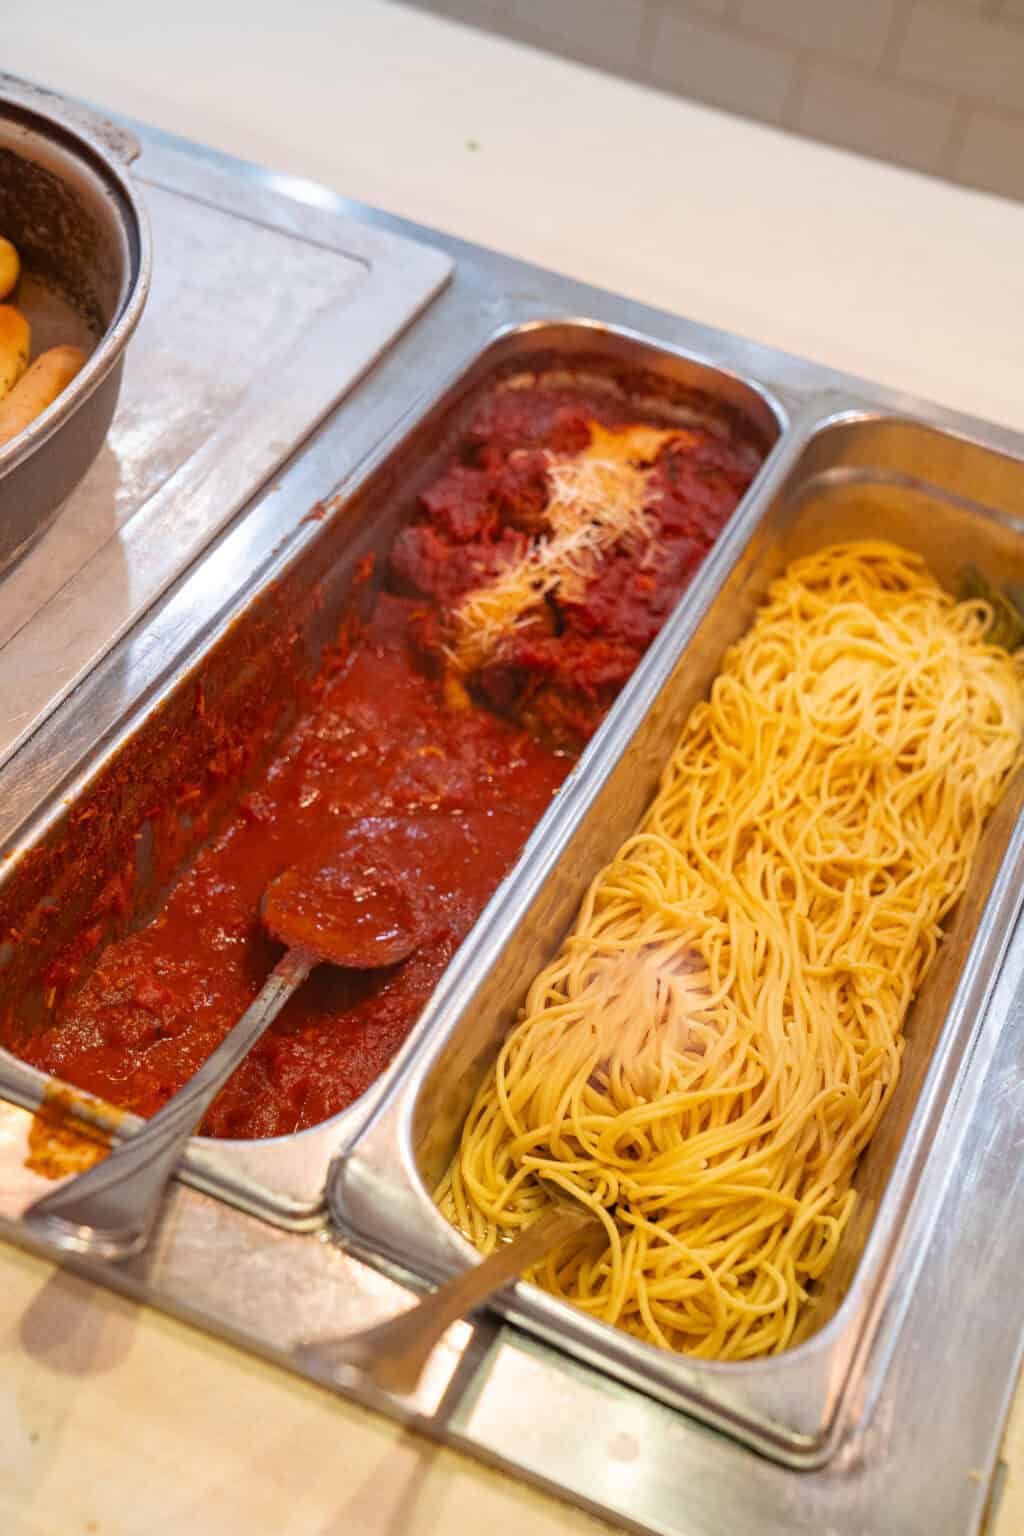 a tray of food with spaghetti and sauce